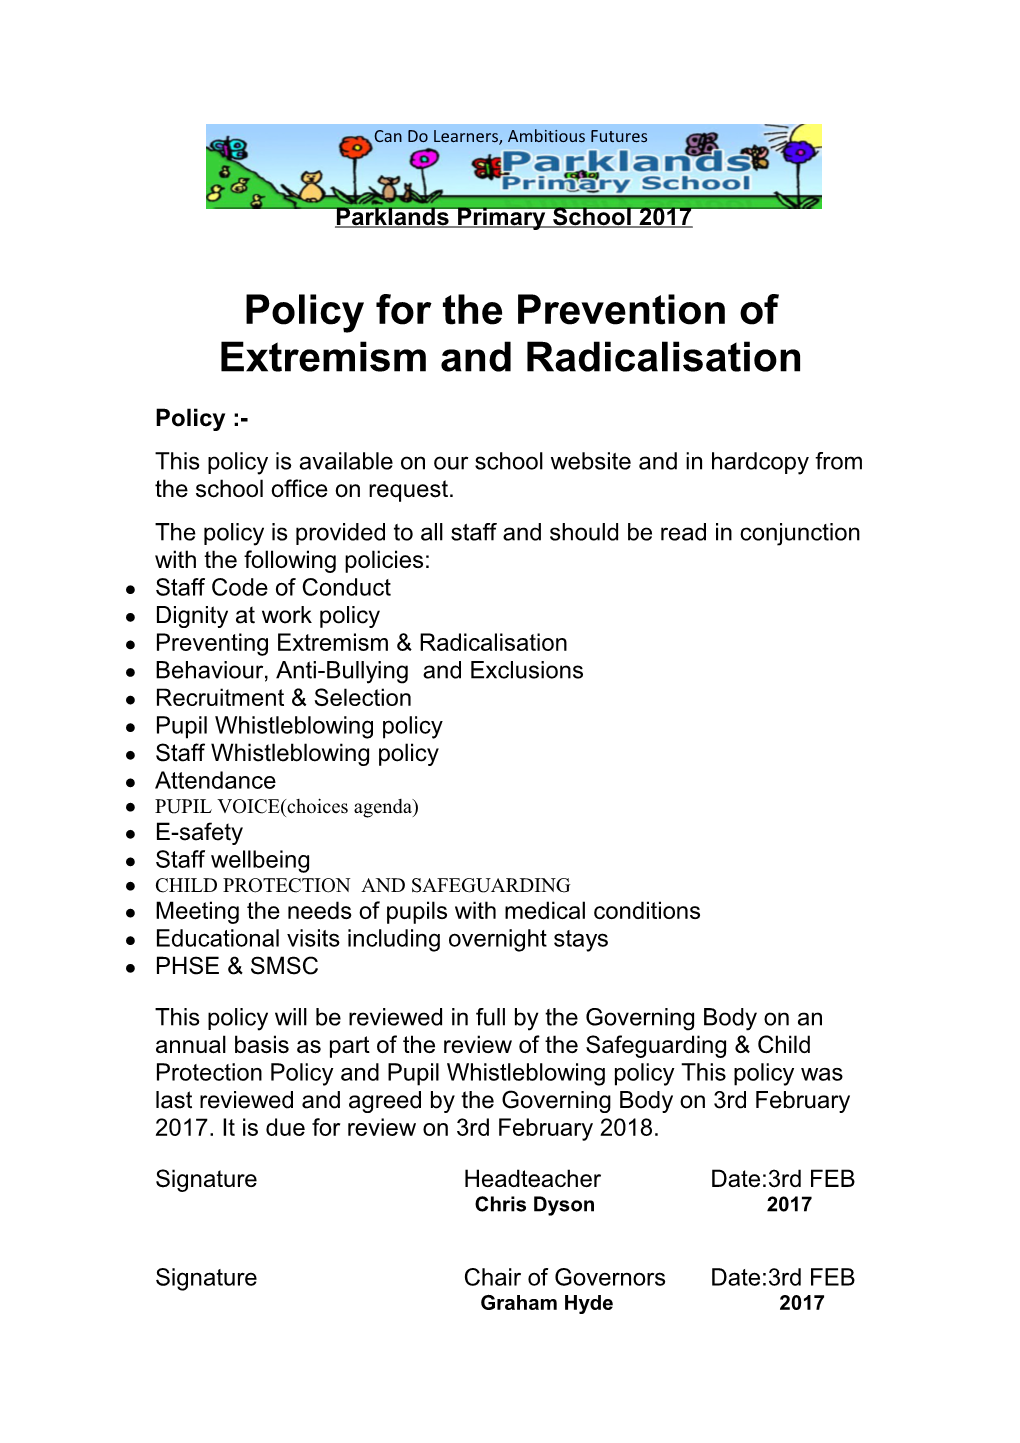 Policy for the Prevention of Extremism and Radicalisation